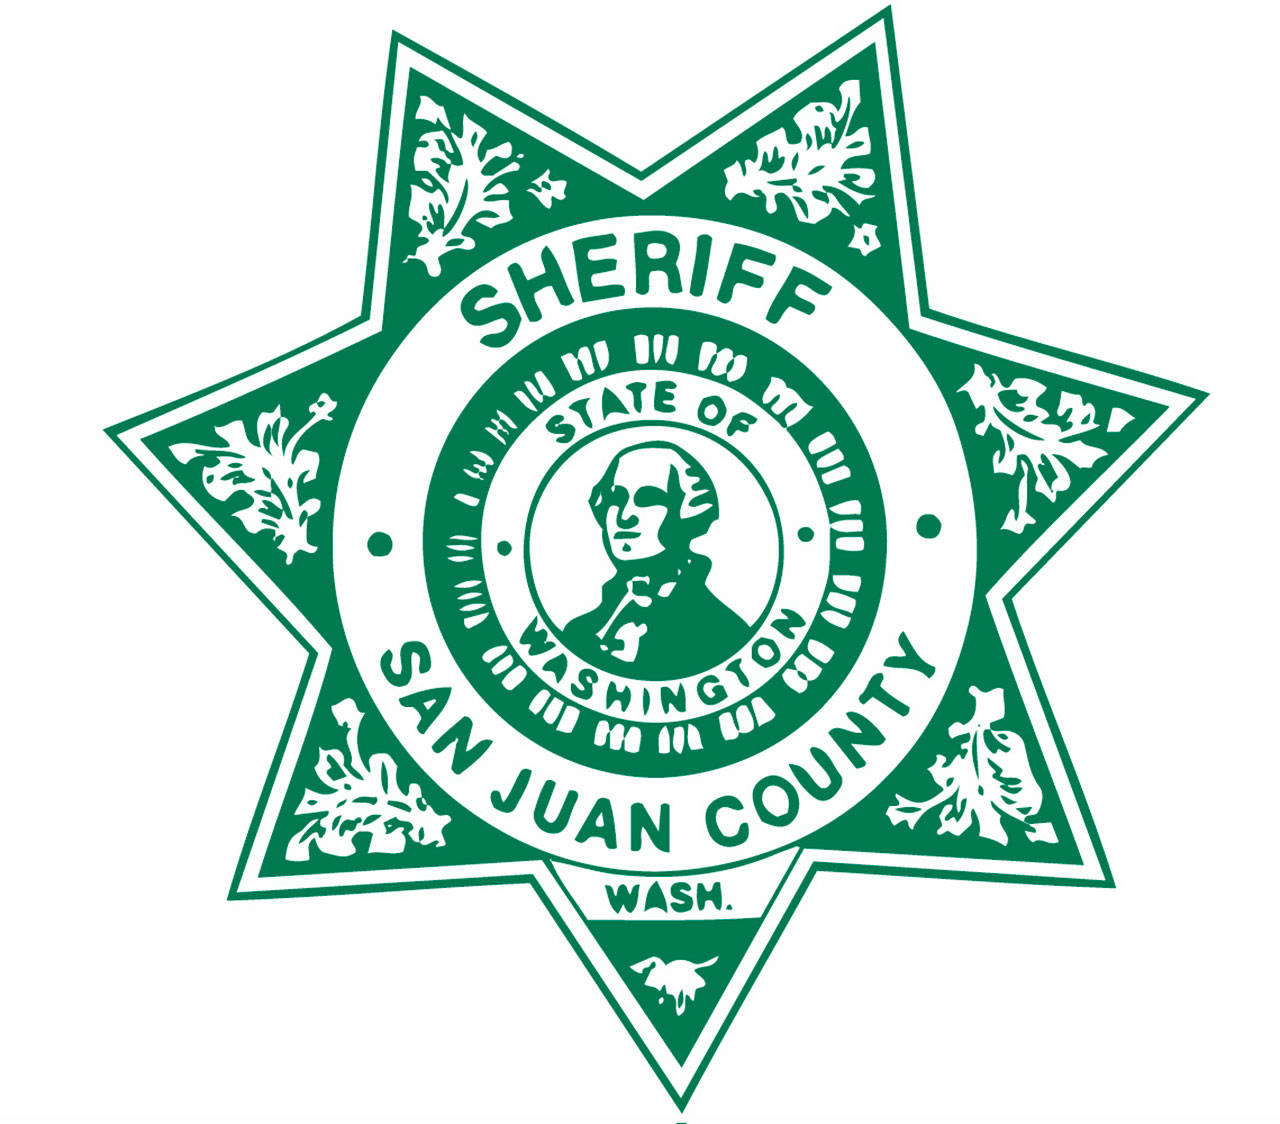 Witness tampering; dead rabbit hung on car; vehicle tires’ cut | Sheriff’s log